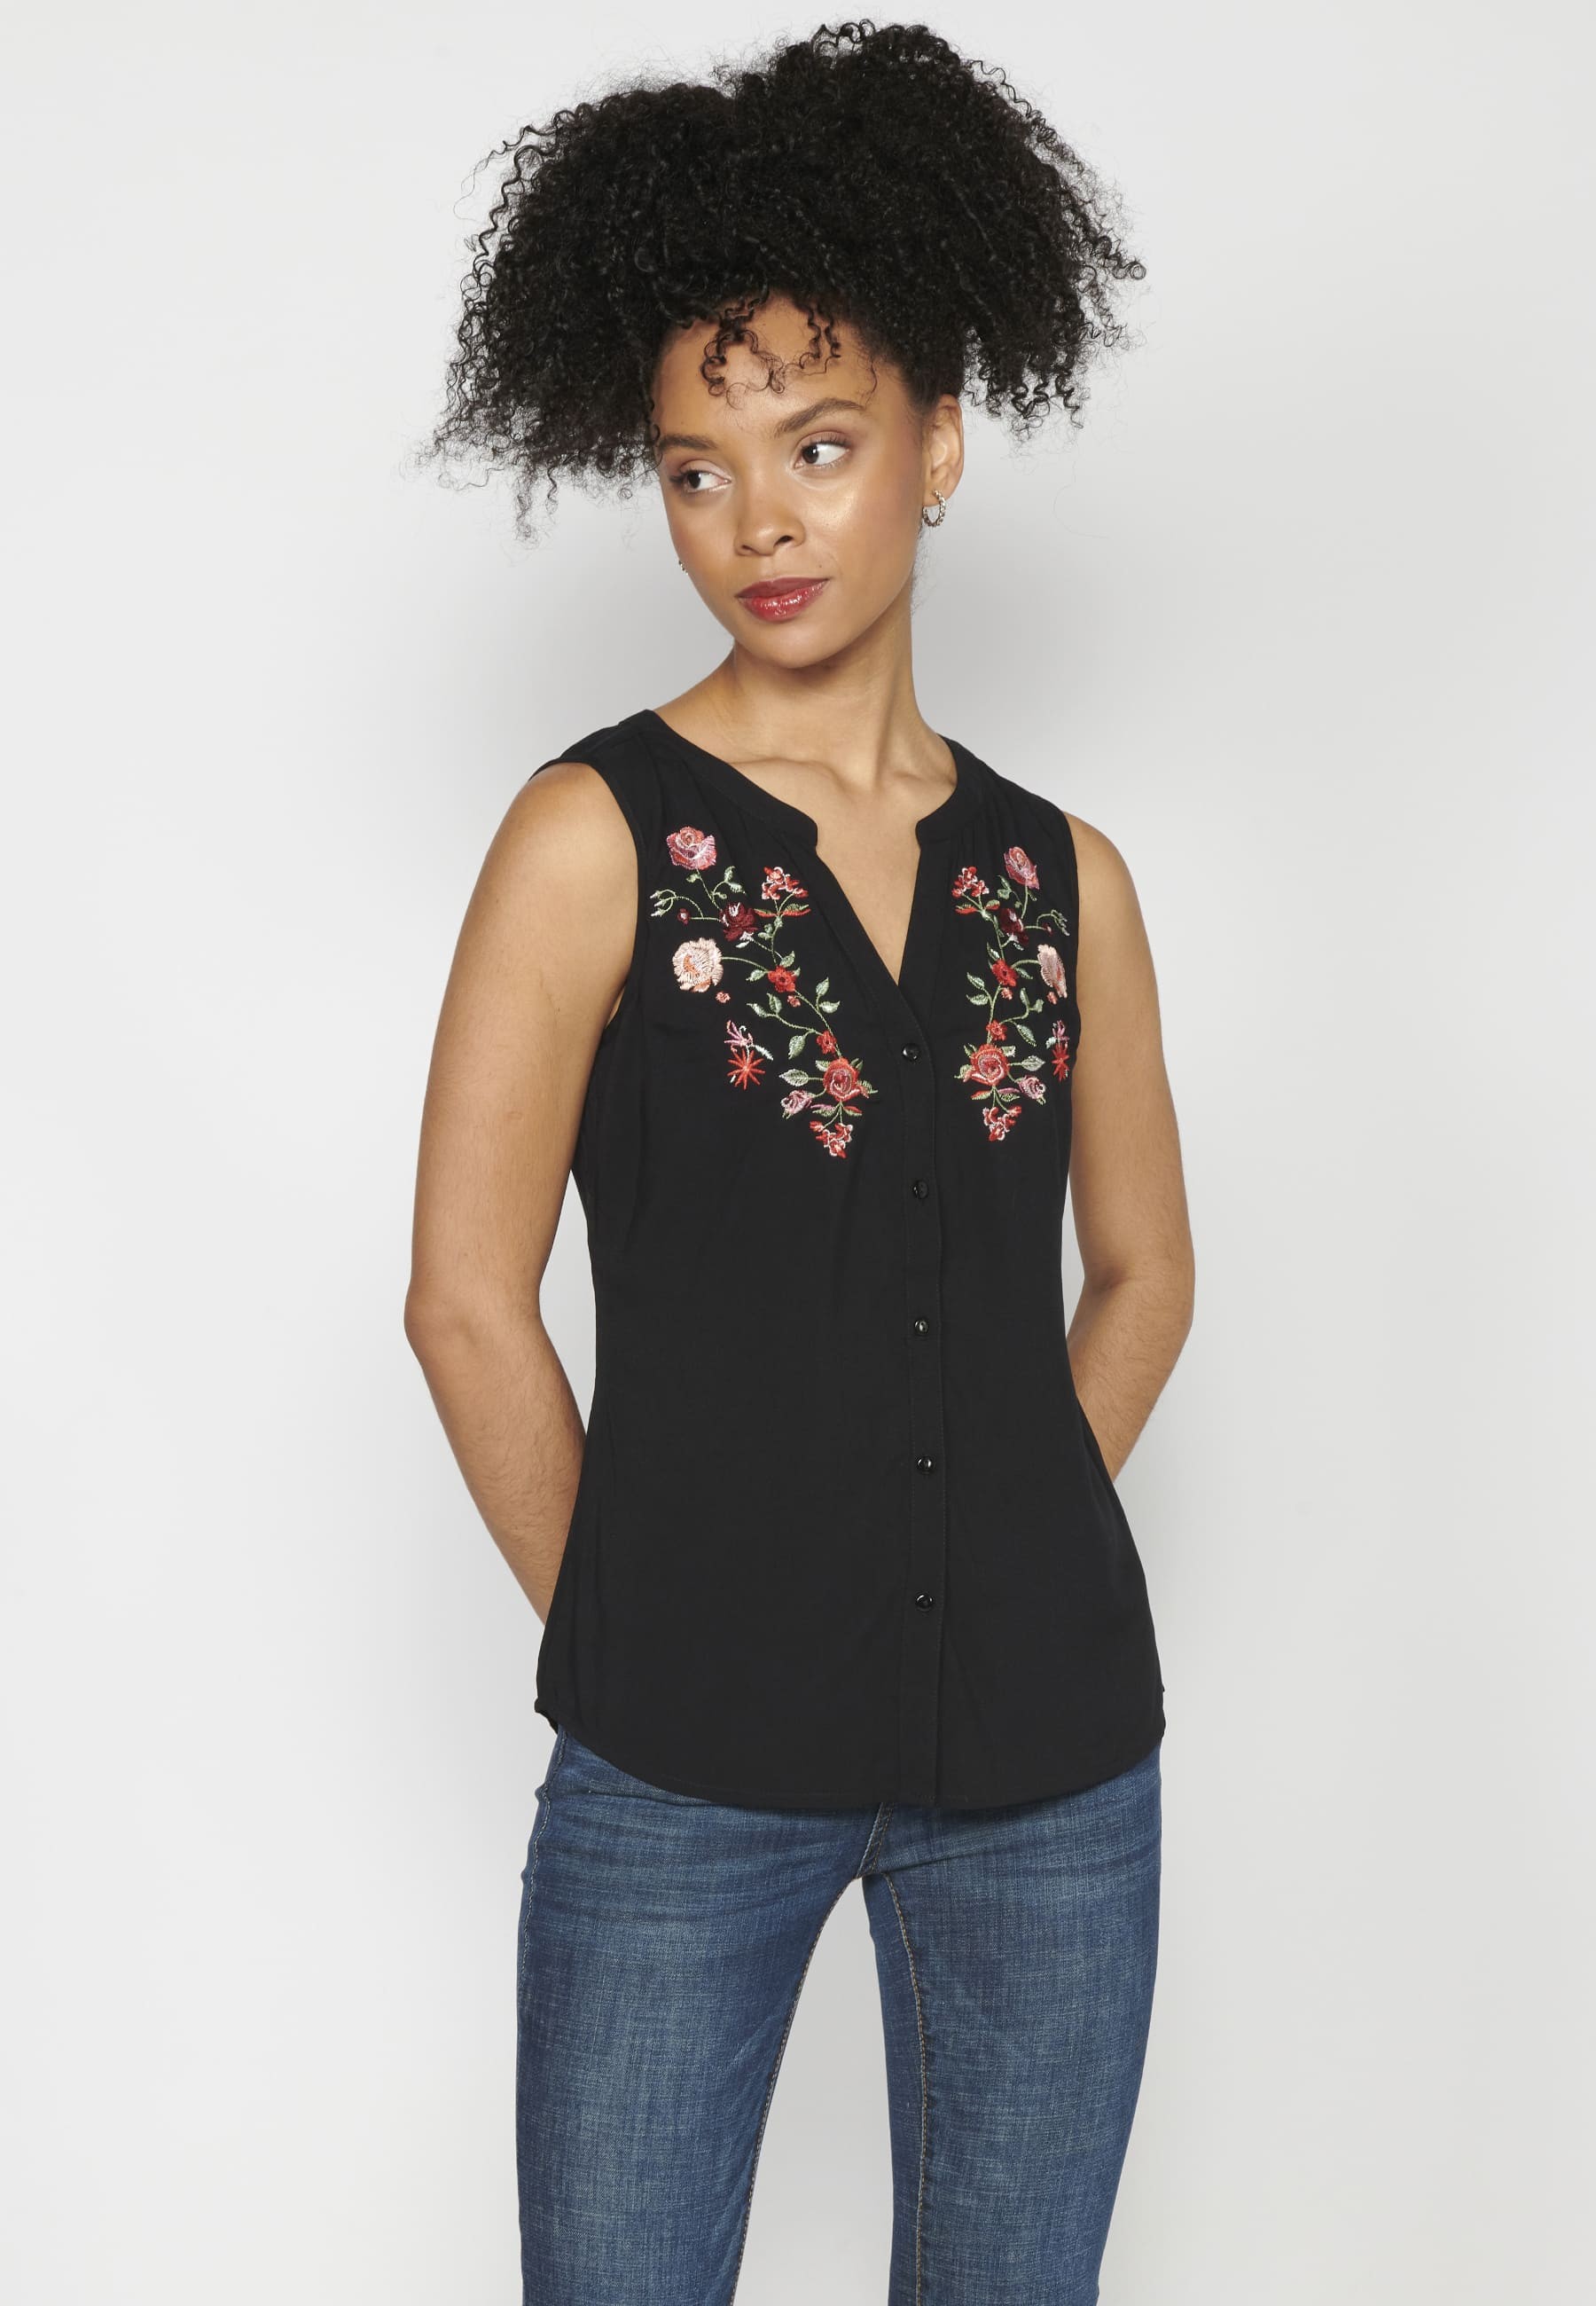 Sleeveless Blouse with Black Floral Embroidery for Women